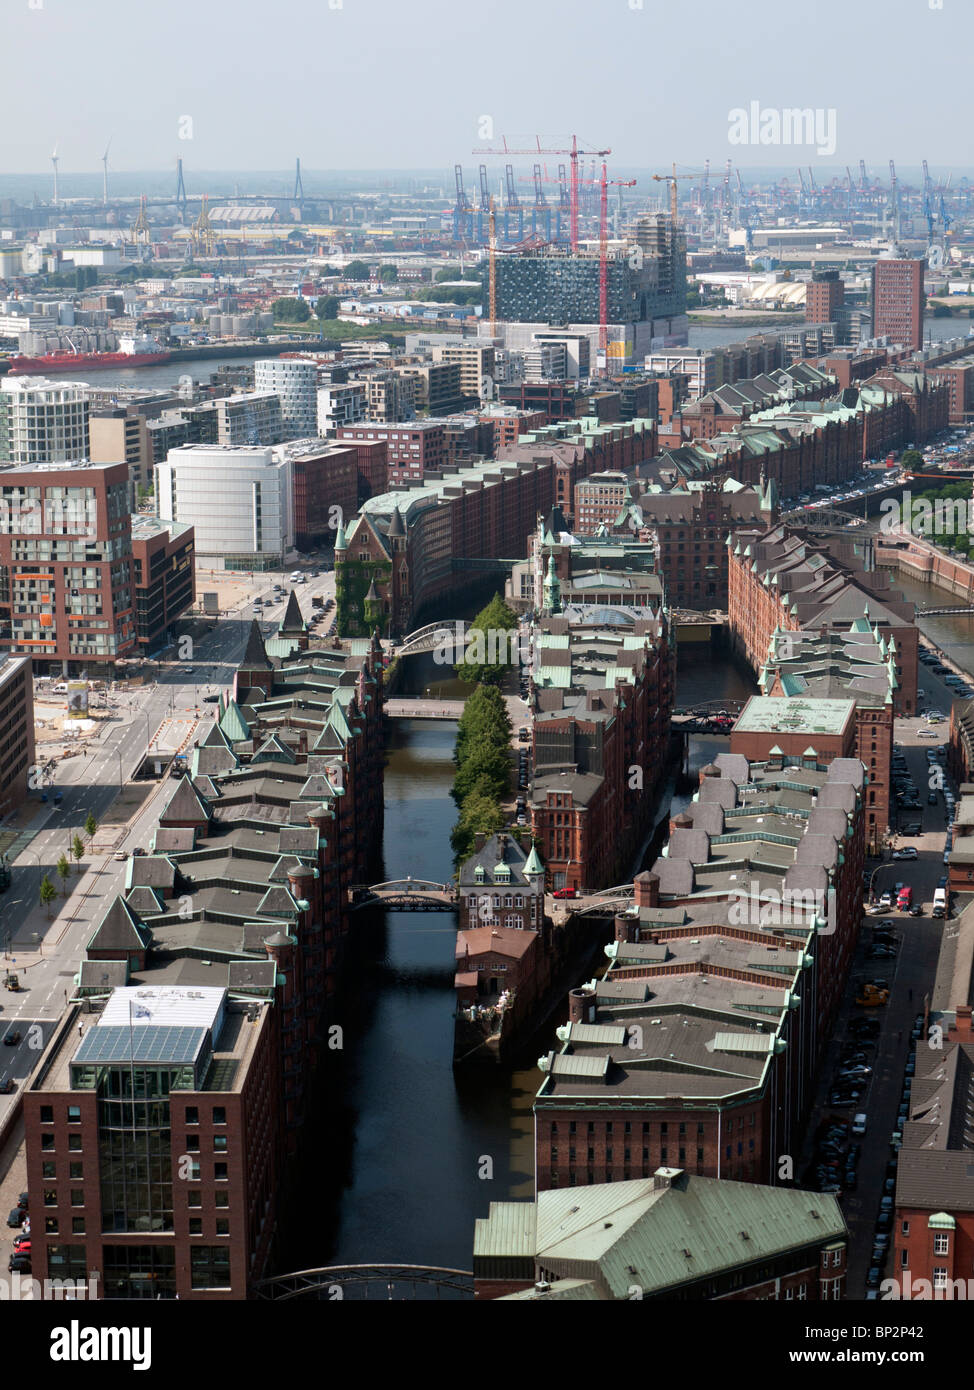 View over Speicherstadt historic warehouse and canal district in Hamburg Germany Stock Photo